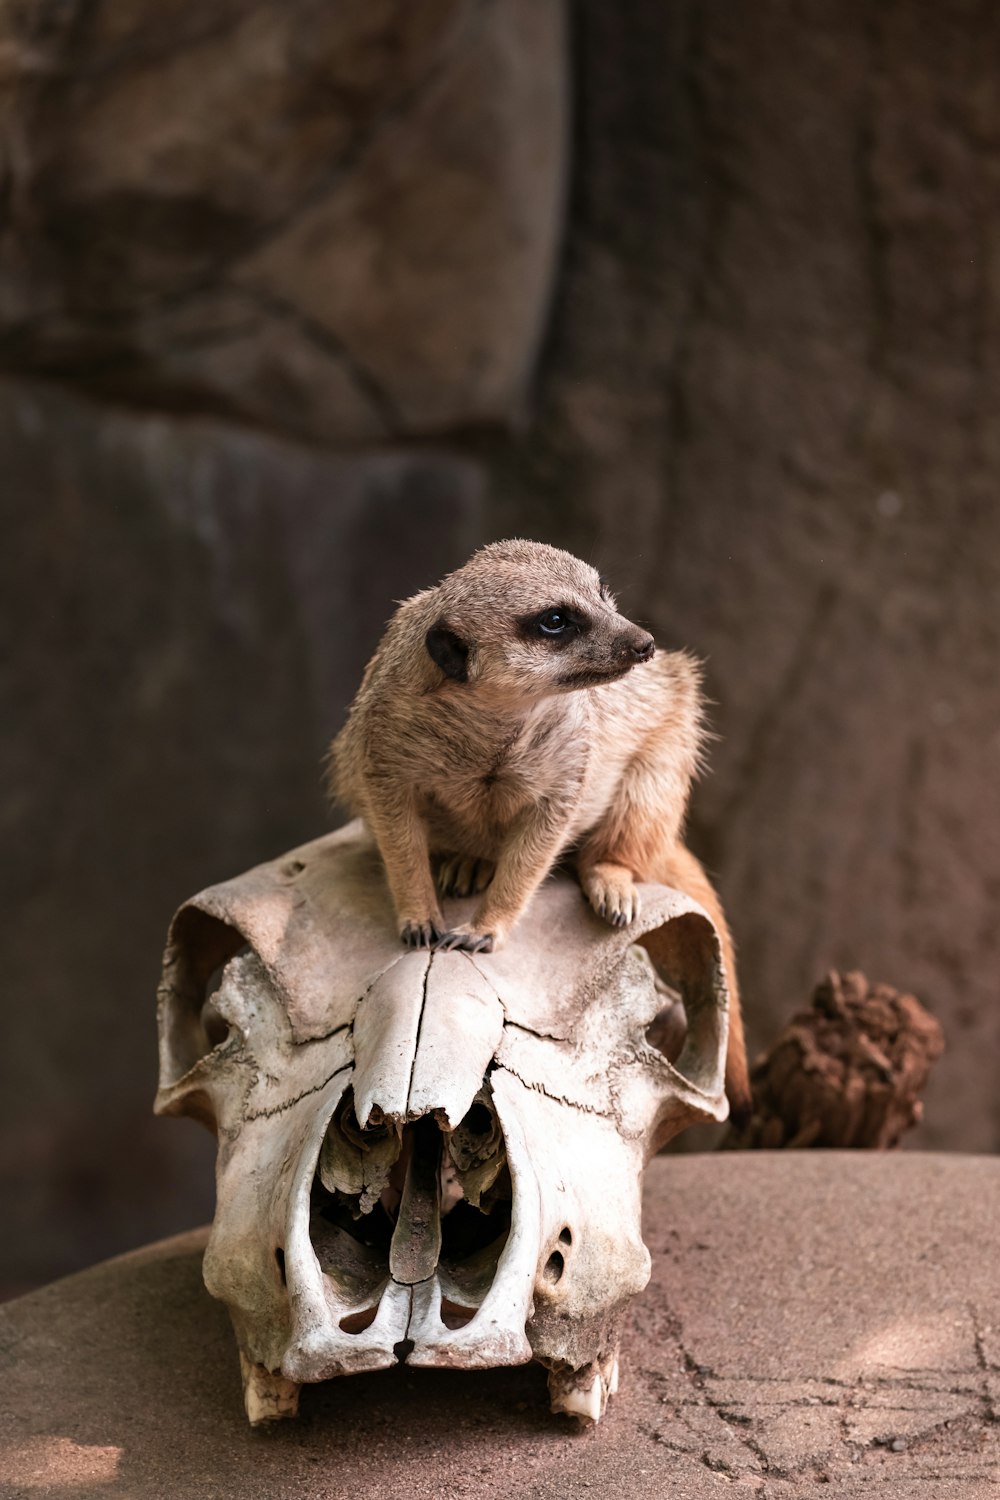 a meerkat sitting on top of a human skull